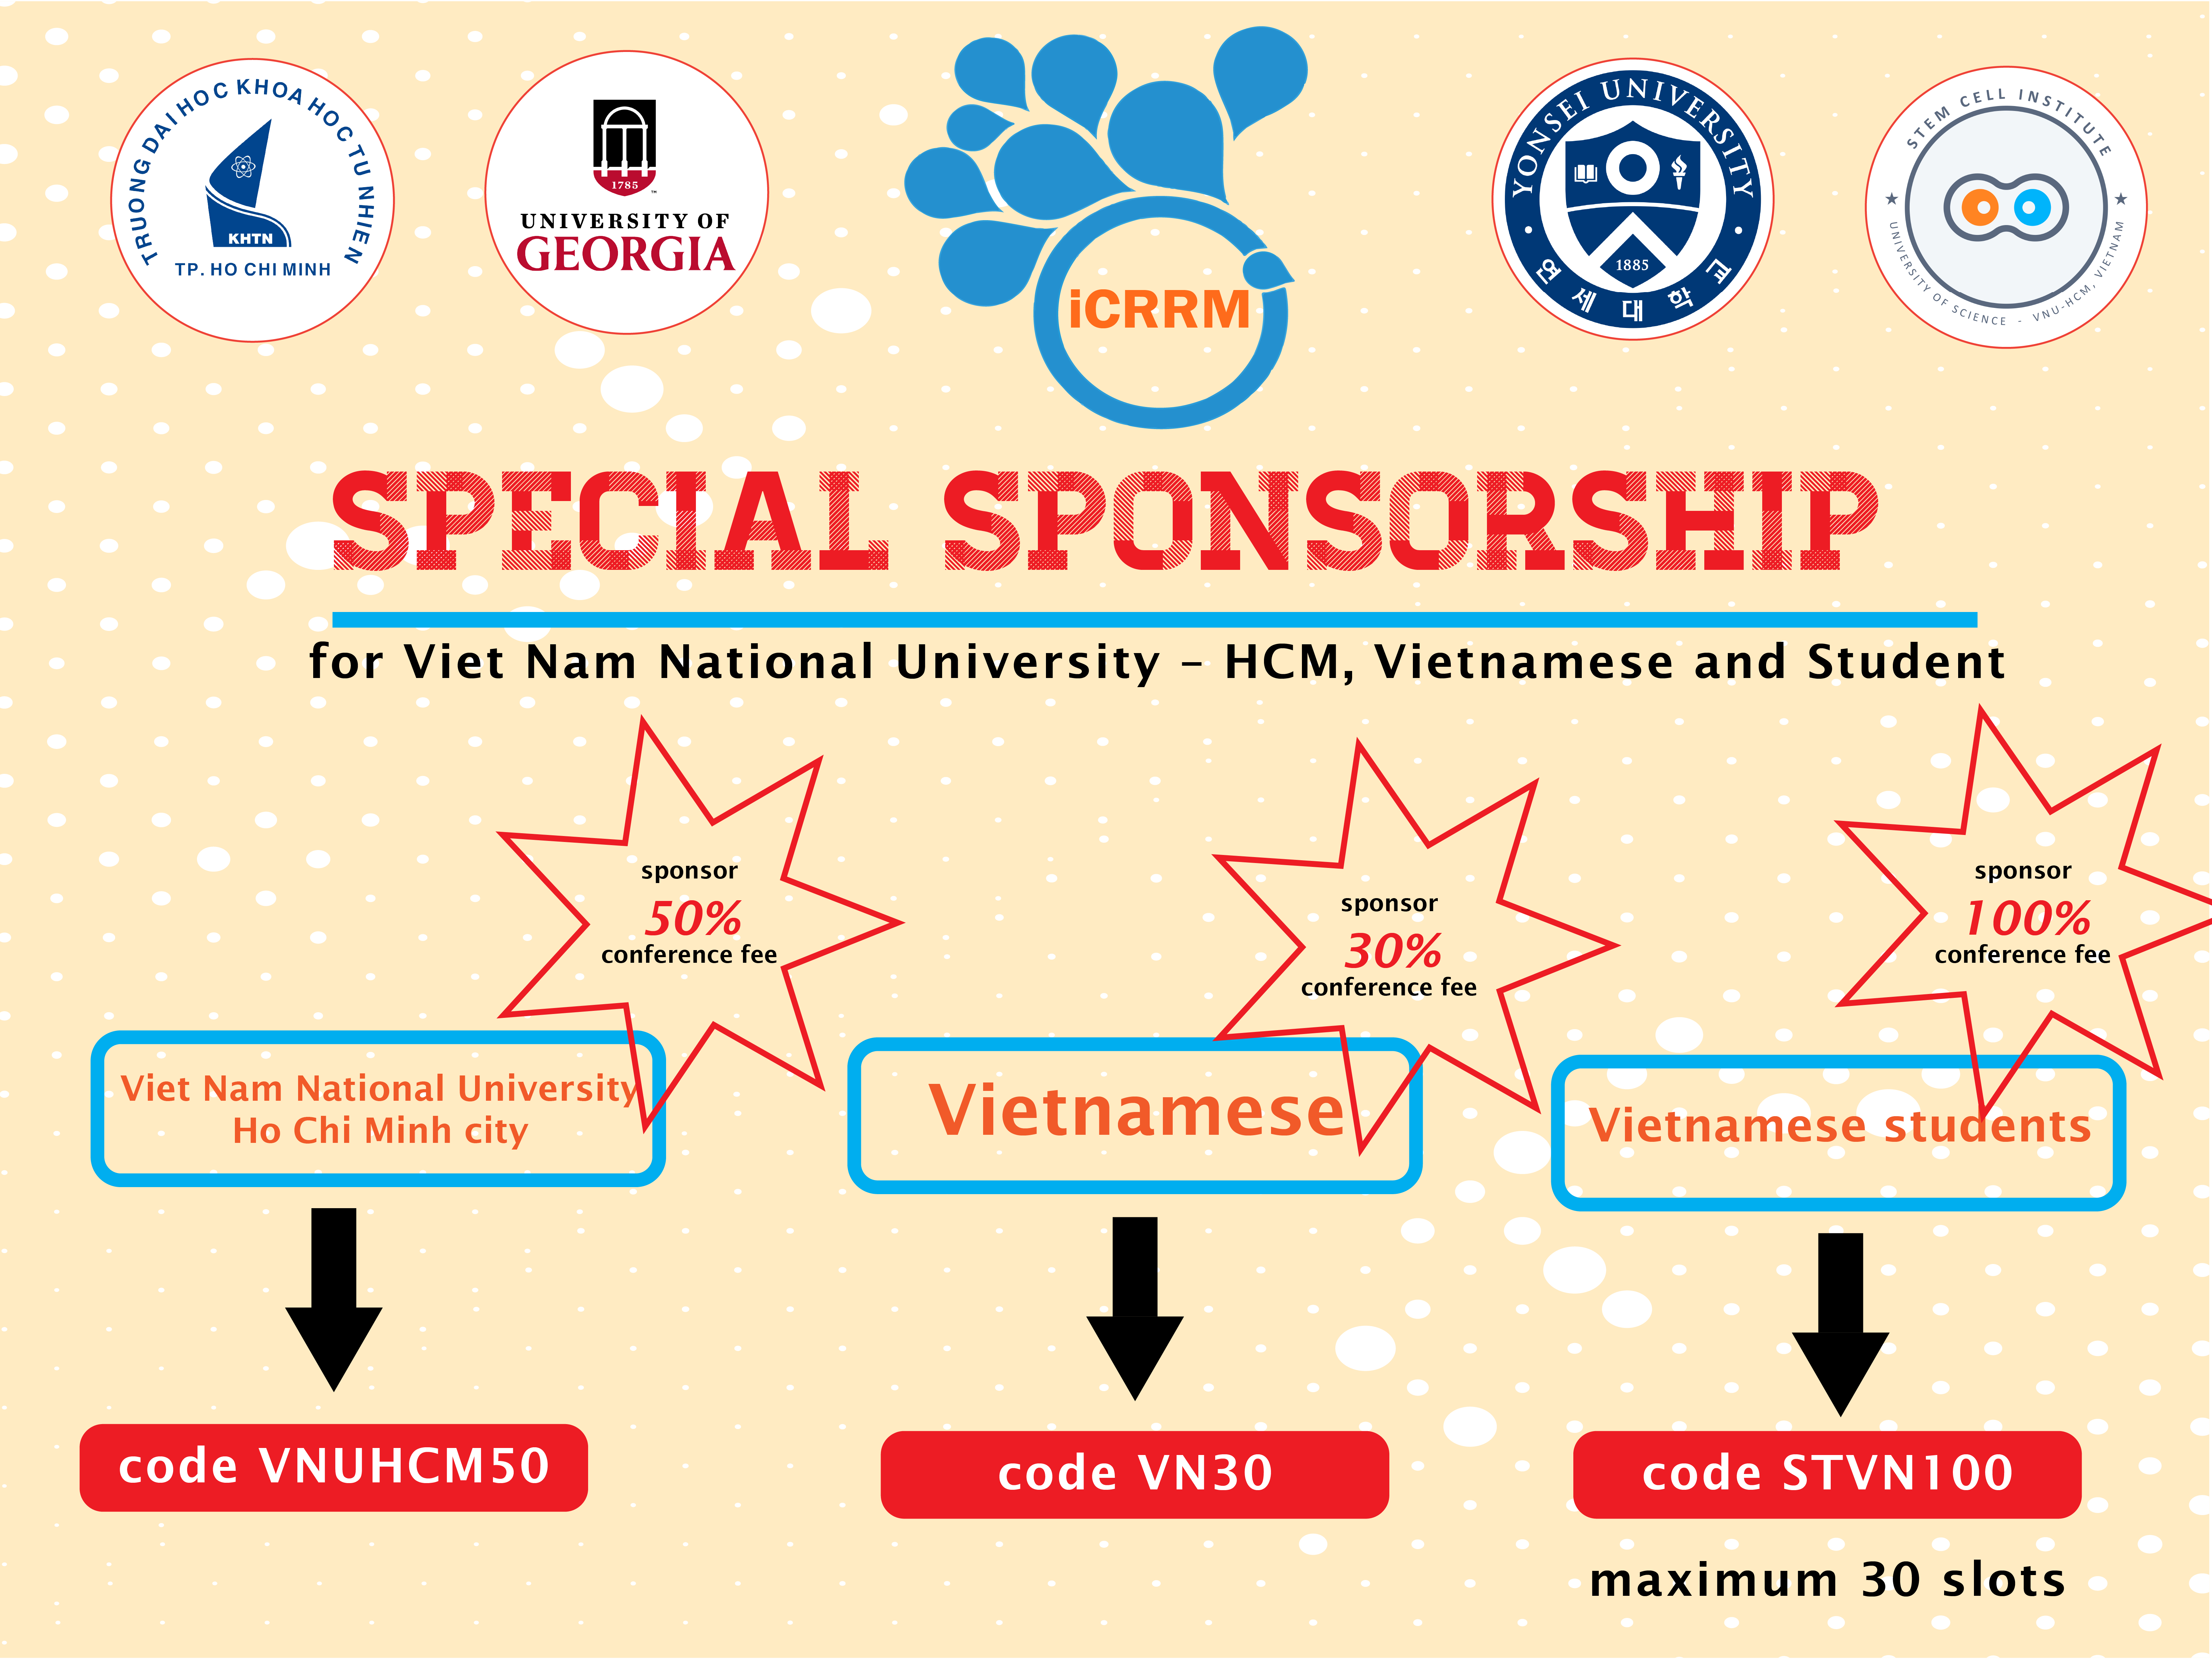 iCRRM special sponsorship for Viet Nam National University – Ho Chi Minh city and Others!